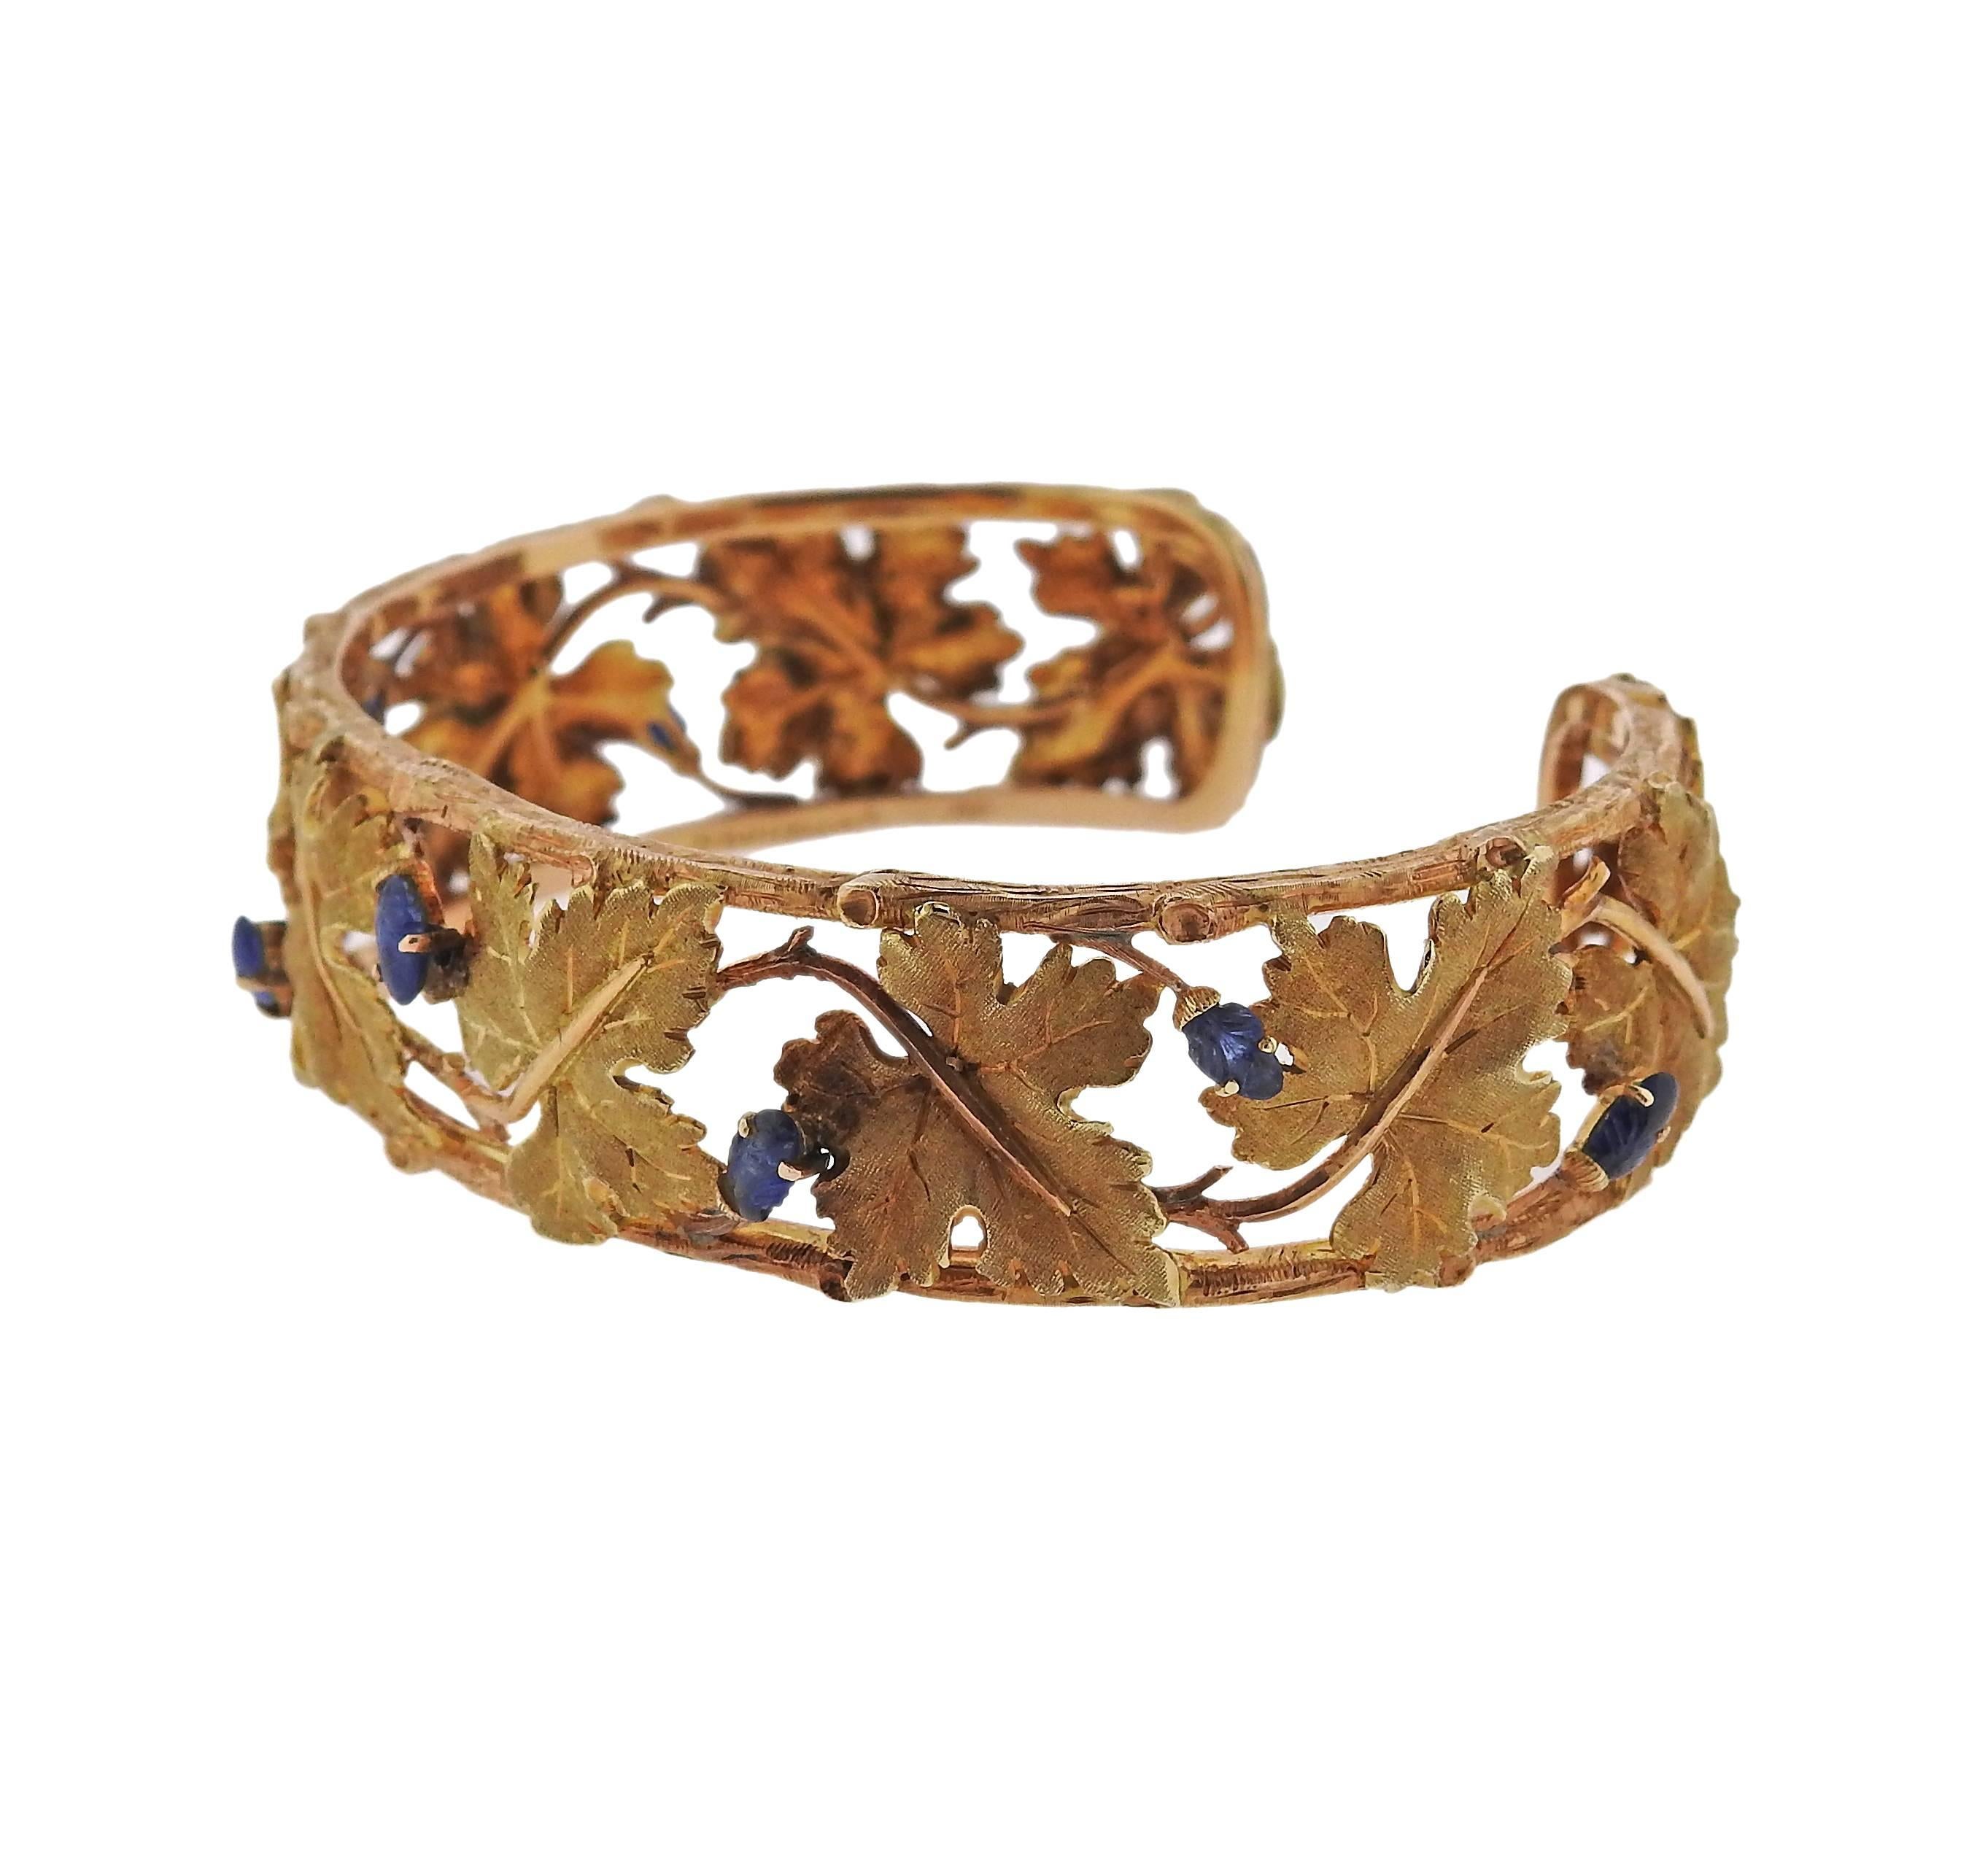 An 18k gold leaf motif bracelet crafted by Buccellati, featuring carved sapphire. Bracelet measures 17.5mm wide. Will fit up to 6.75